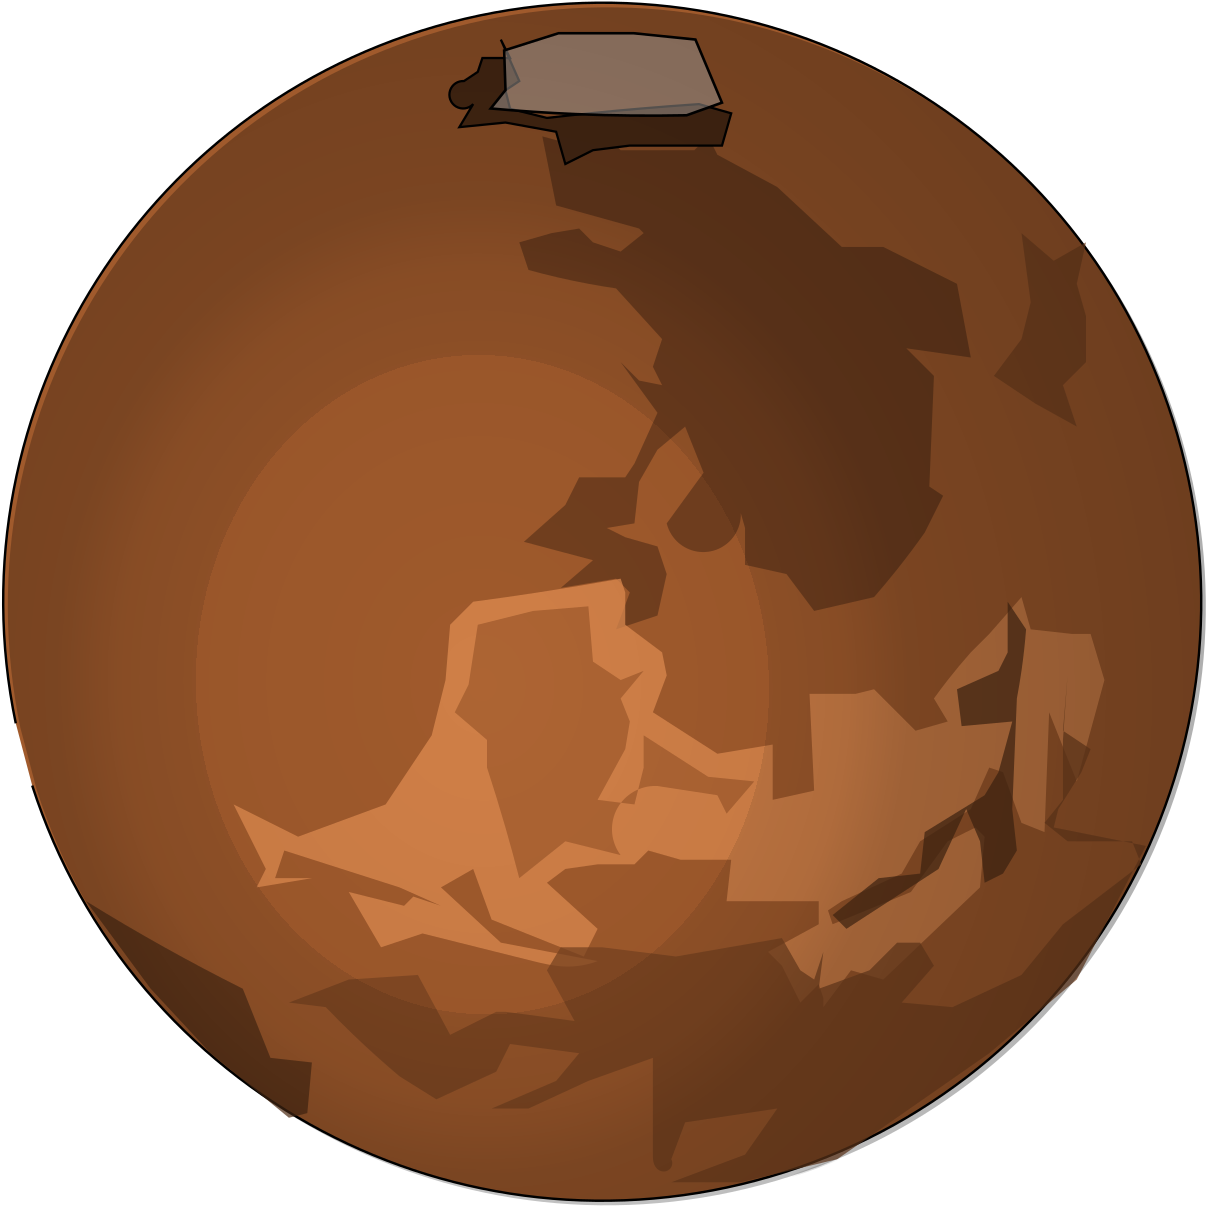 Stylized Mars Planet Graphic PNG image